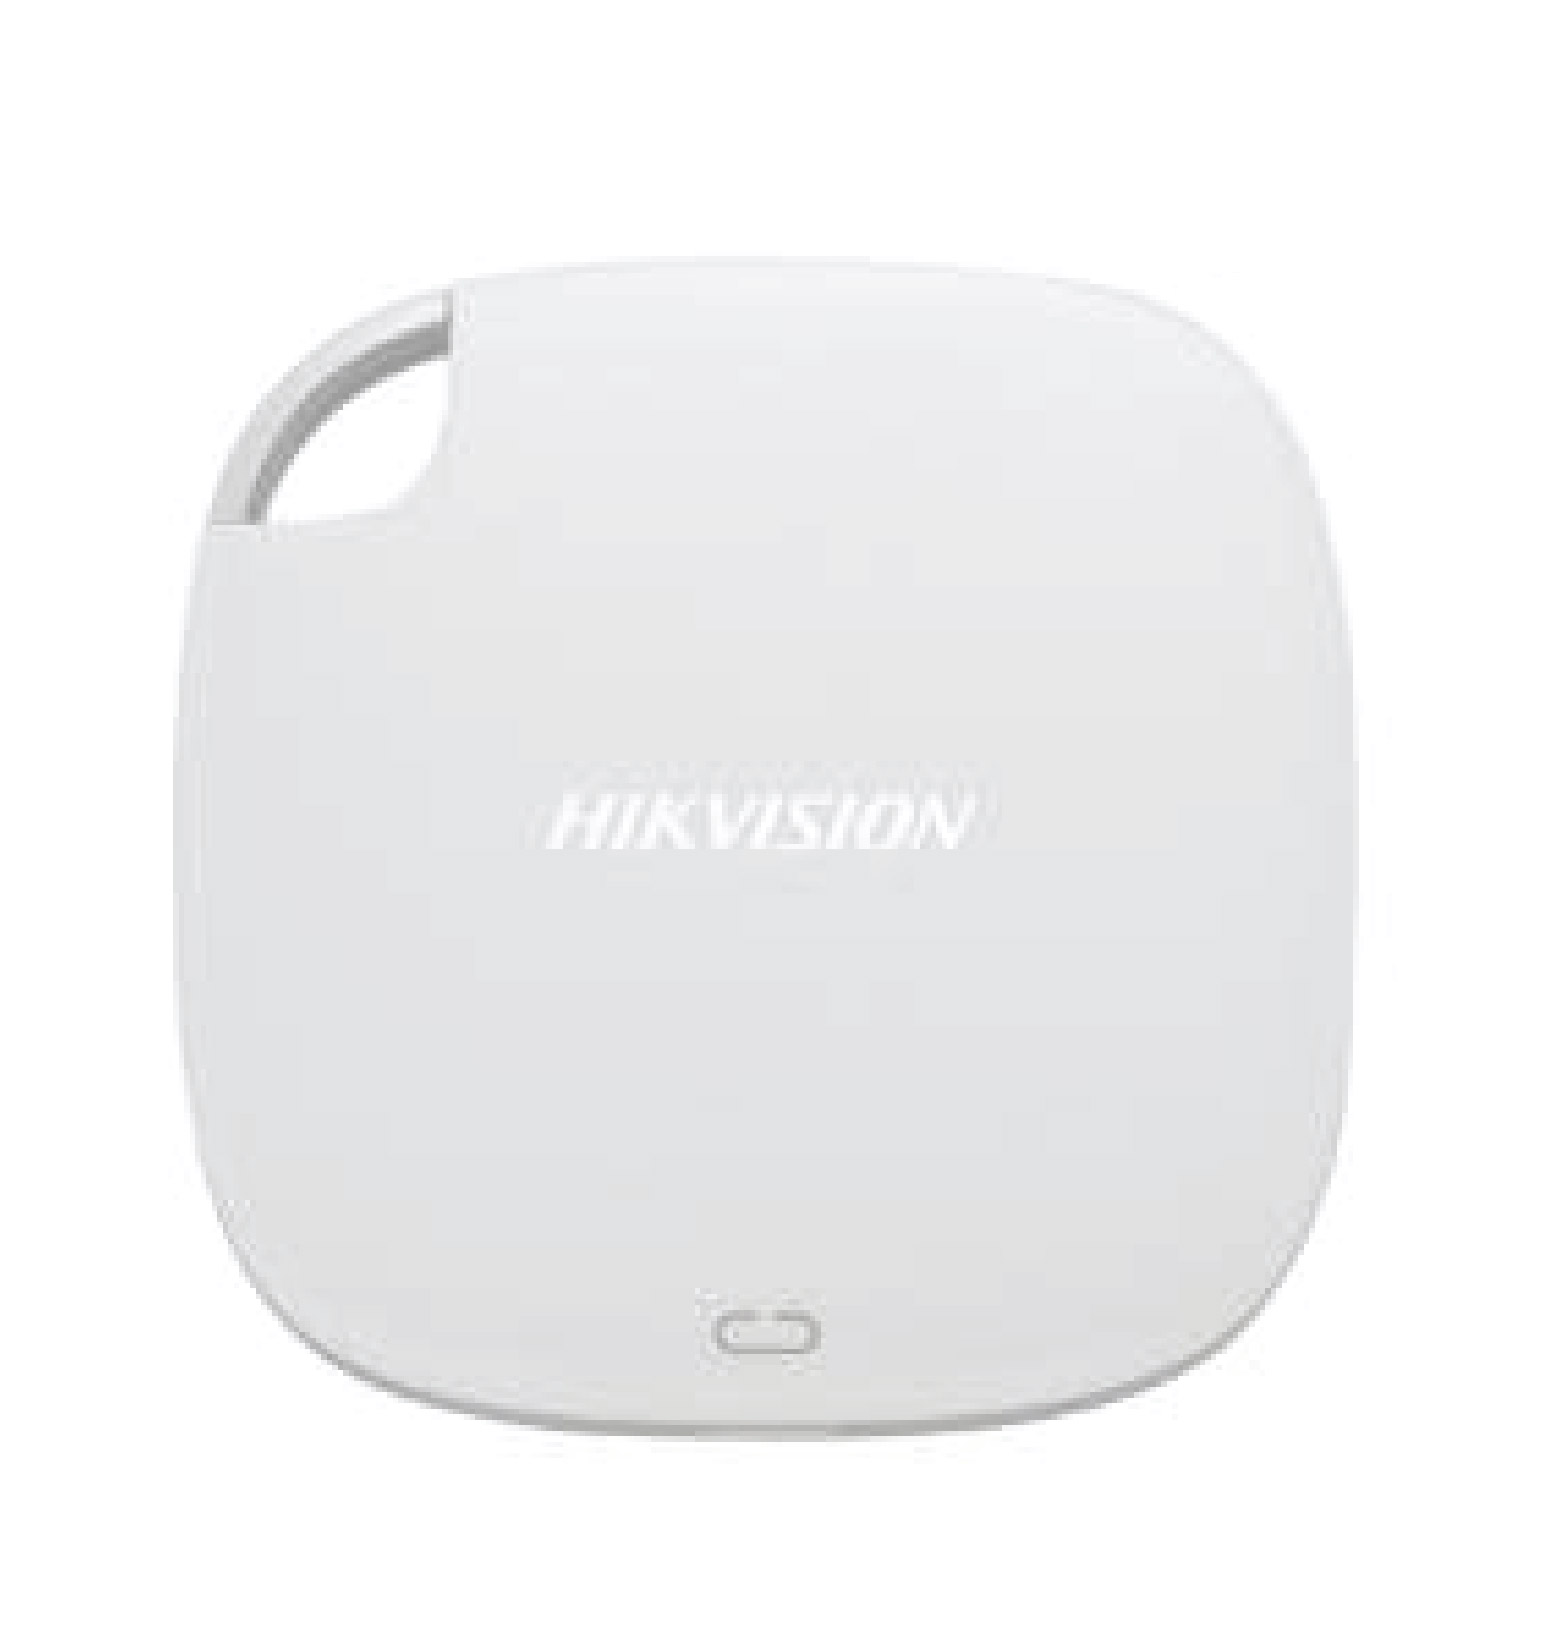 HIKVISION T100I-512GB-W Portable SSD